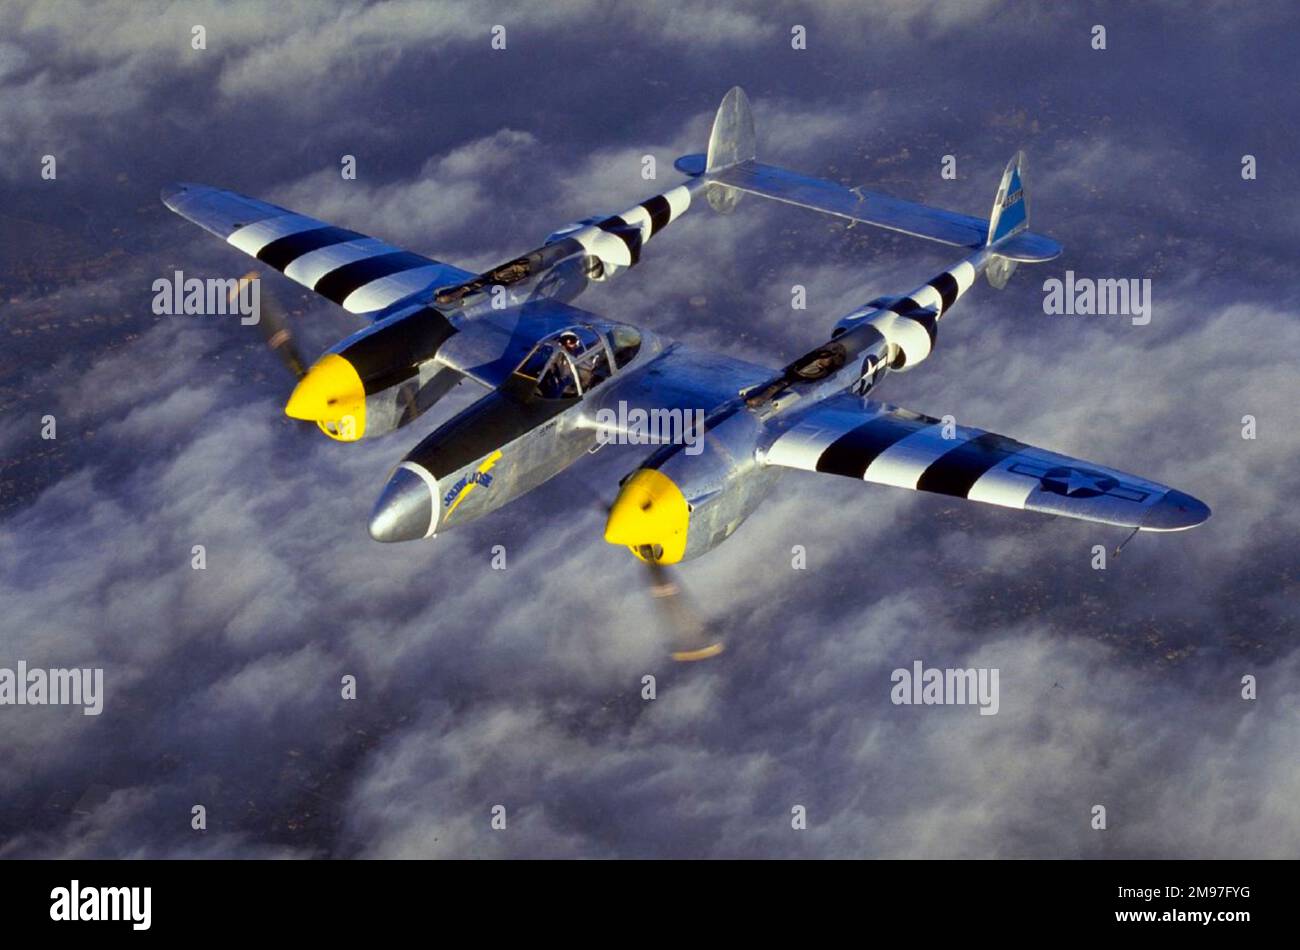 Lockheed P-38J Lightning -in D-Day stripes to help distinguish Allied from enemy aircraft in the heat of battle. Stock Photo